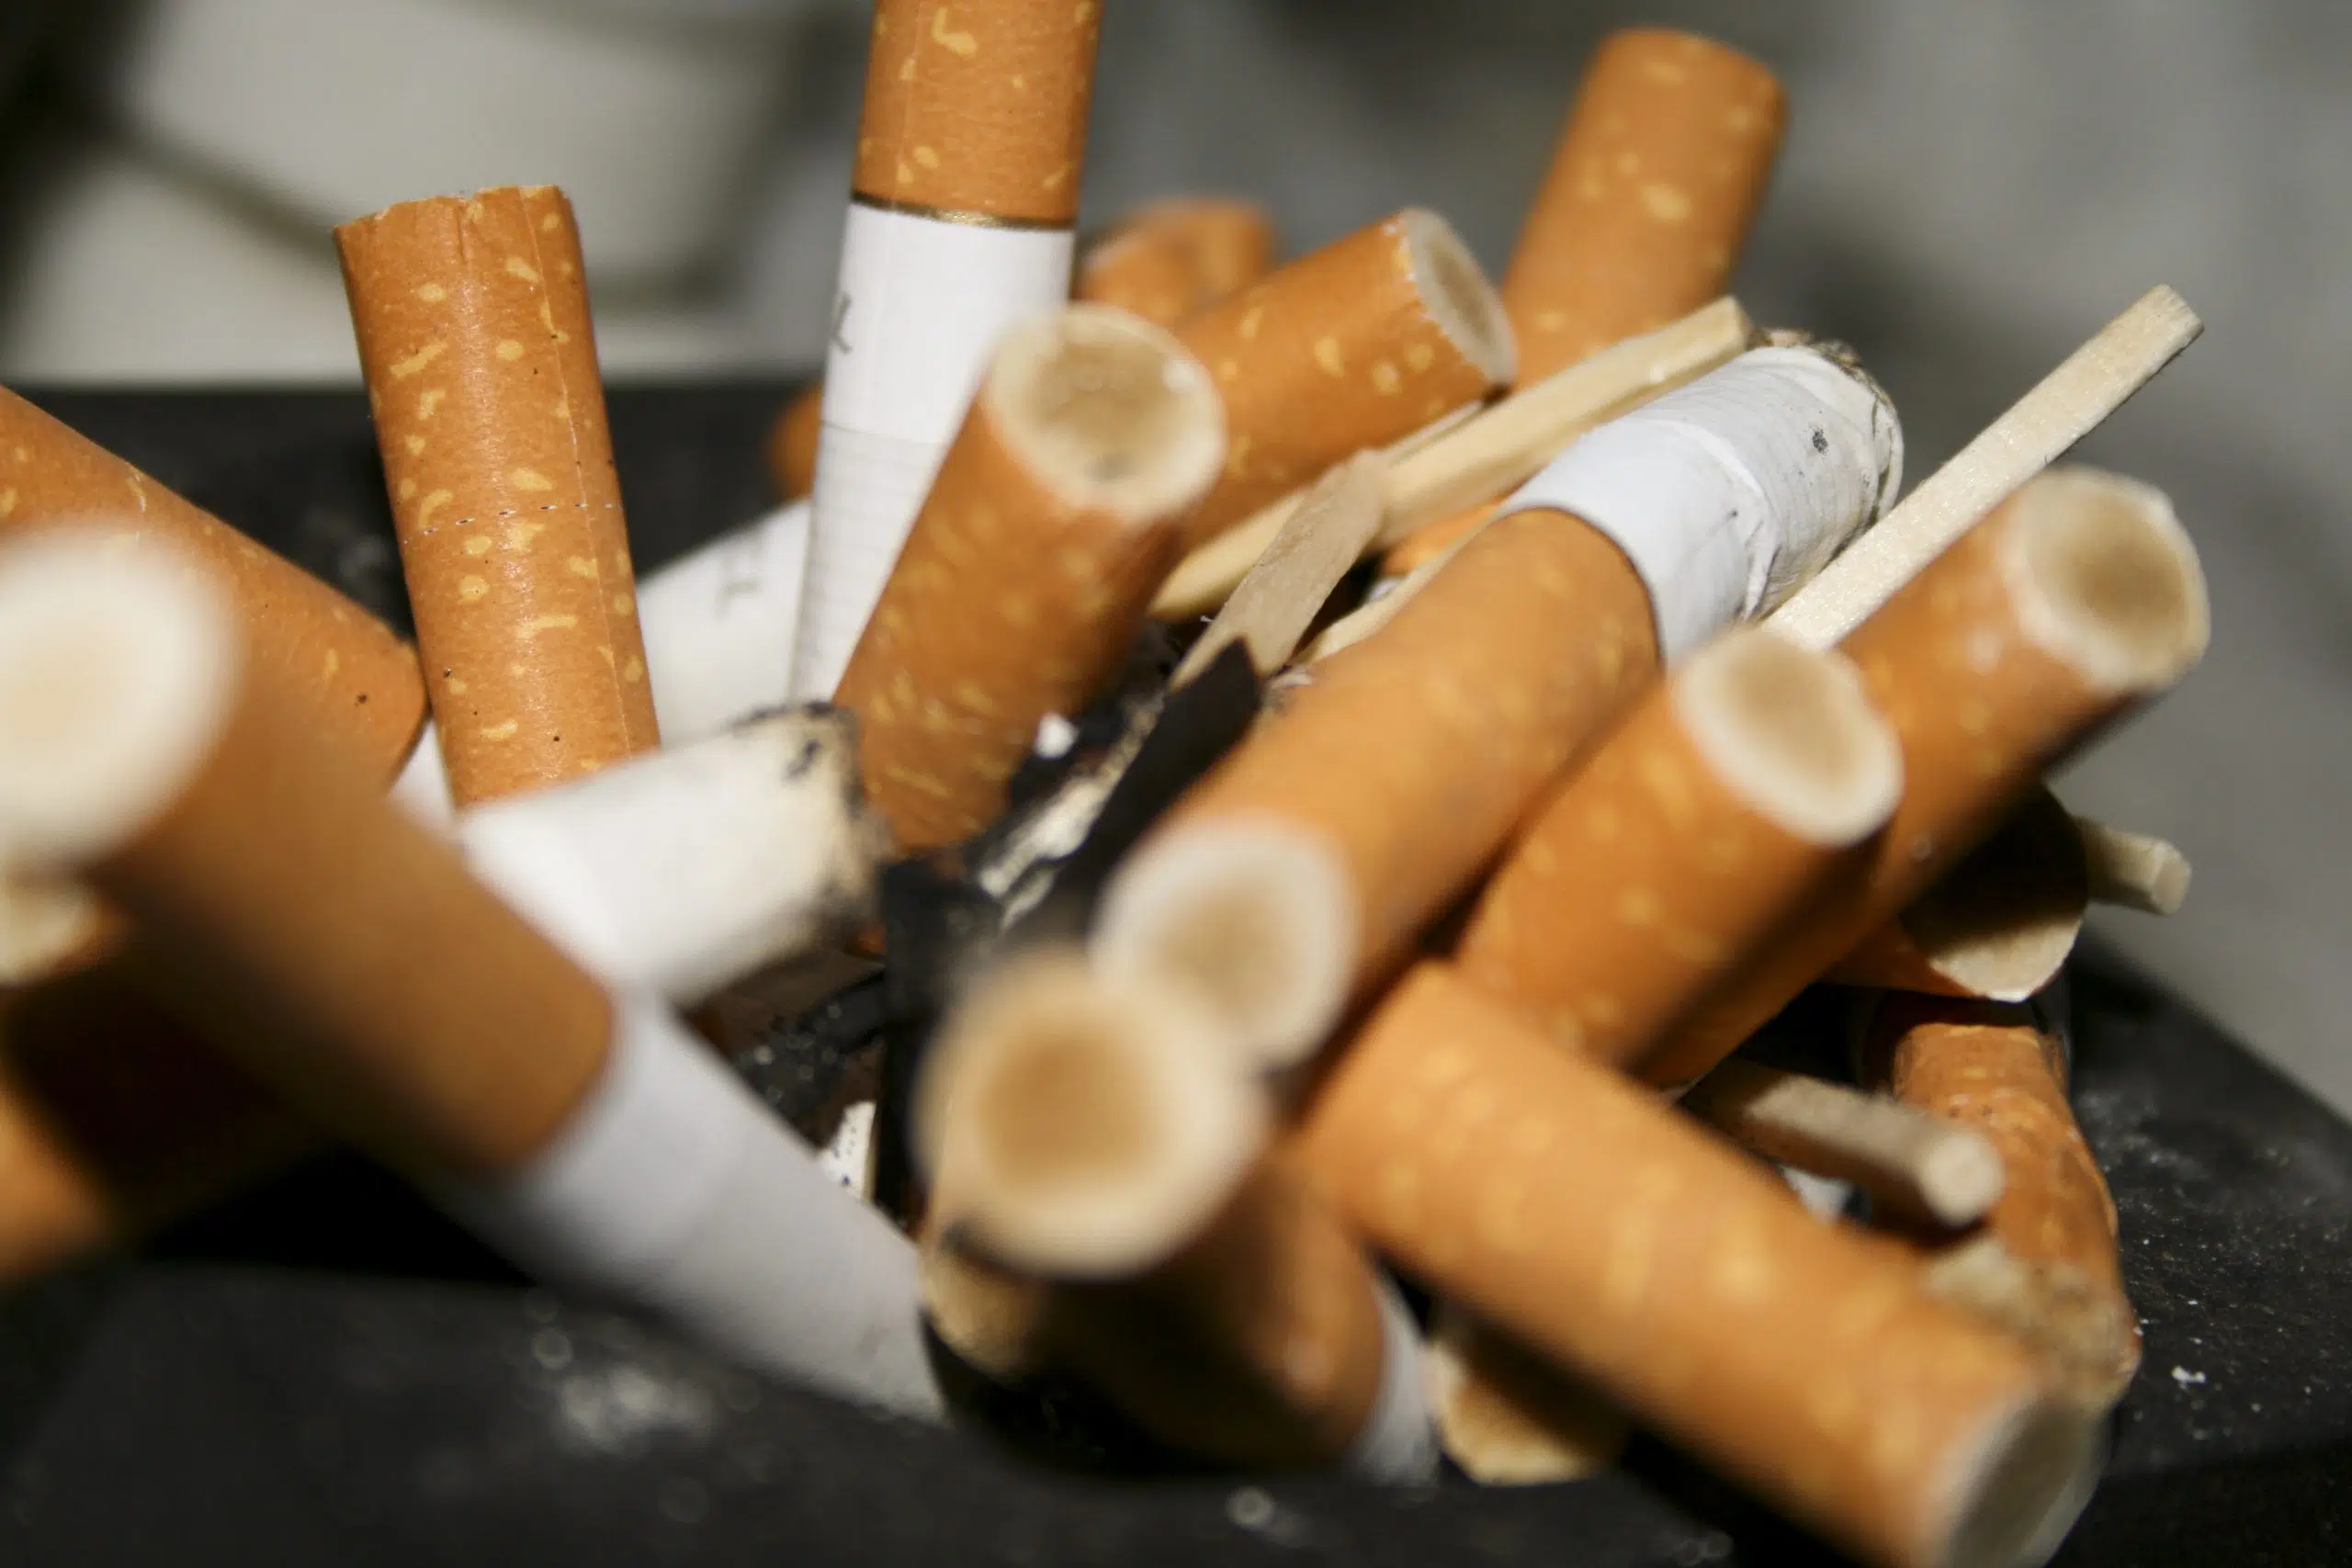 Imperial Tobacco suggests organized crime fueling illegal cigarette sales in B.C.